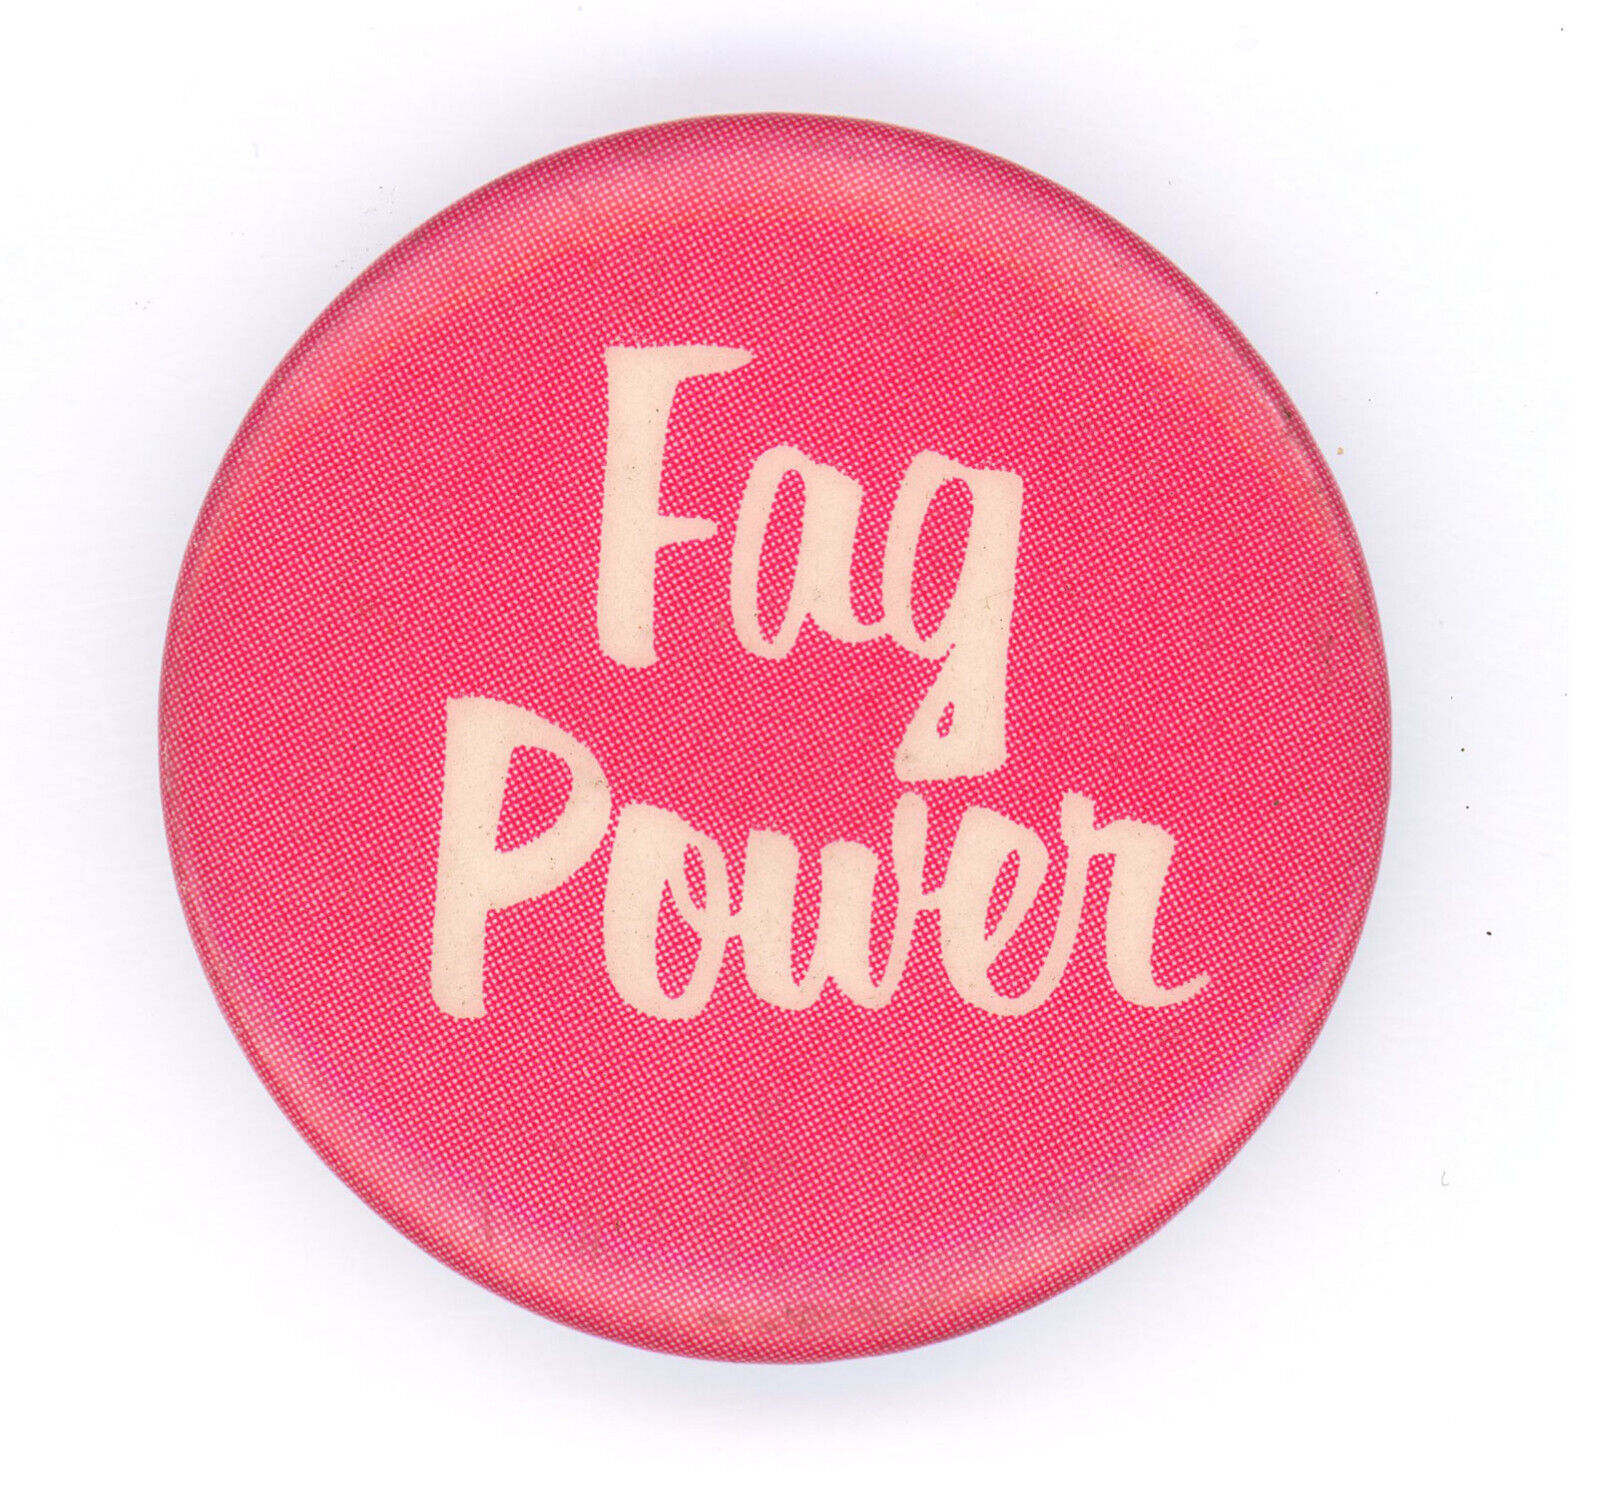 Vintage Gay Rights Button 1960s Fag Power Lesbian LGBT Visibility Pride Closet